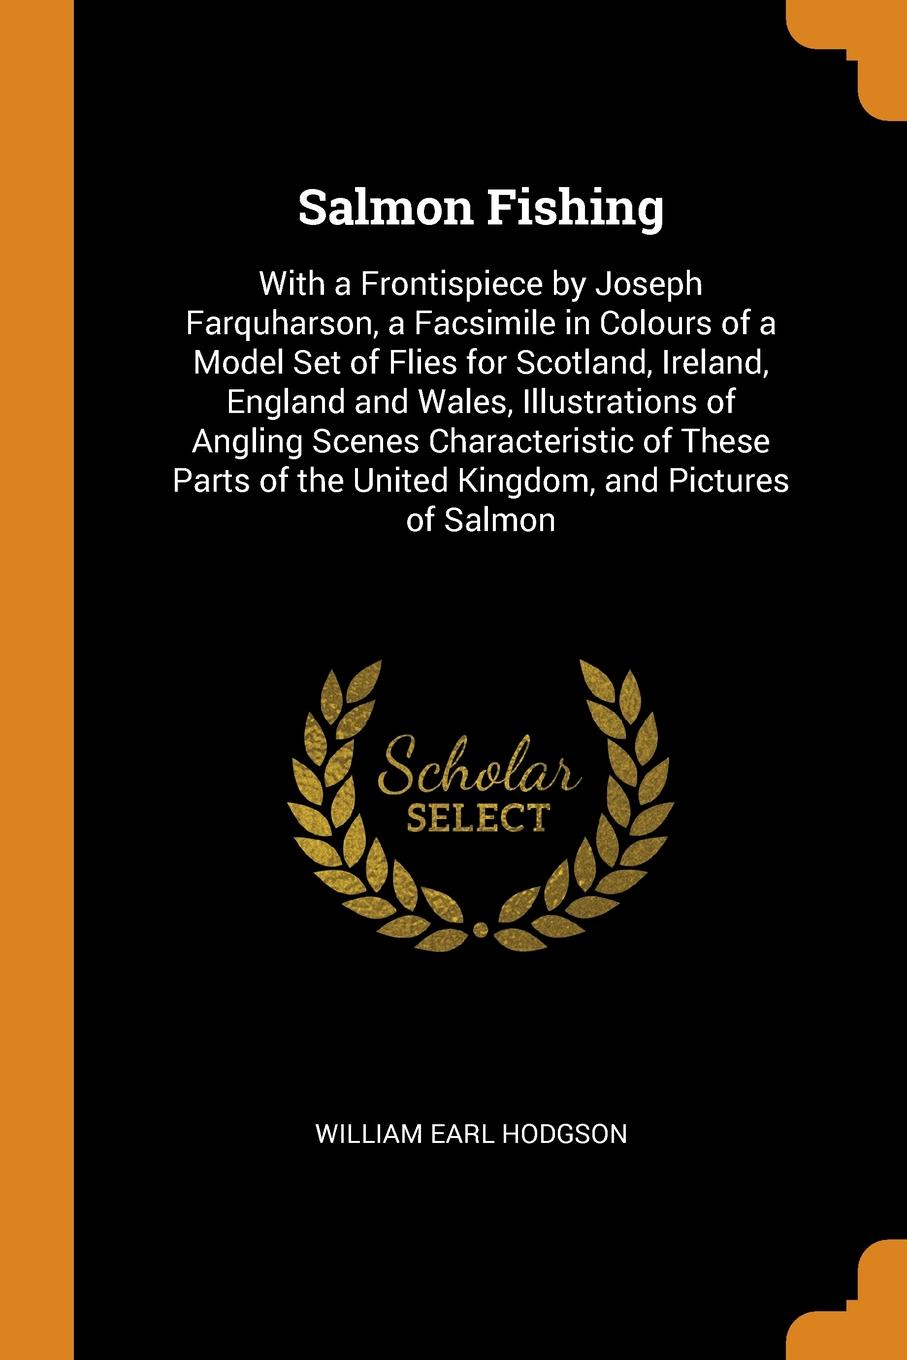 Salmon Fishing. With a Frontispiece by Joseph Farquharson, a Facsimile in Colours of a Model Set of Flies for Scotland, Ireland, England and Wales, Illustrations of Angling Scenes Characteristic of These Parts of the United Kingdom, and Pictures o...